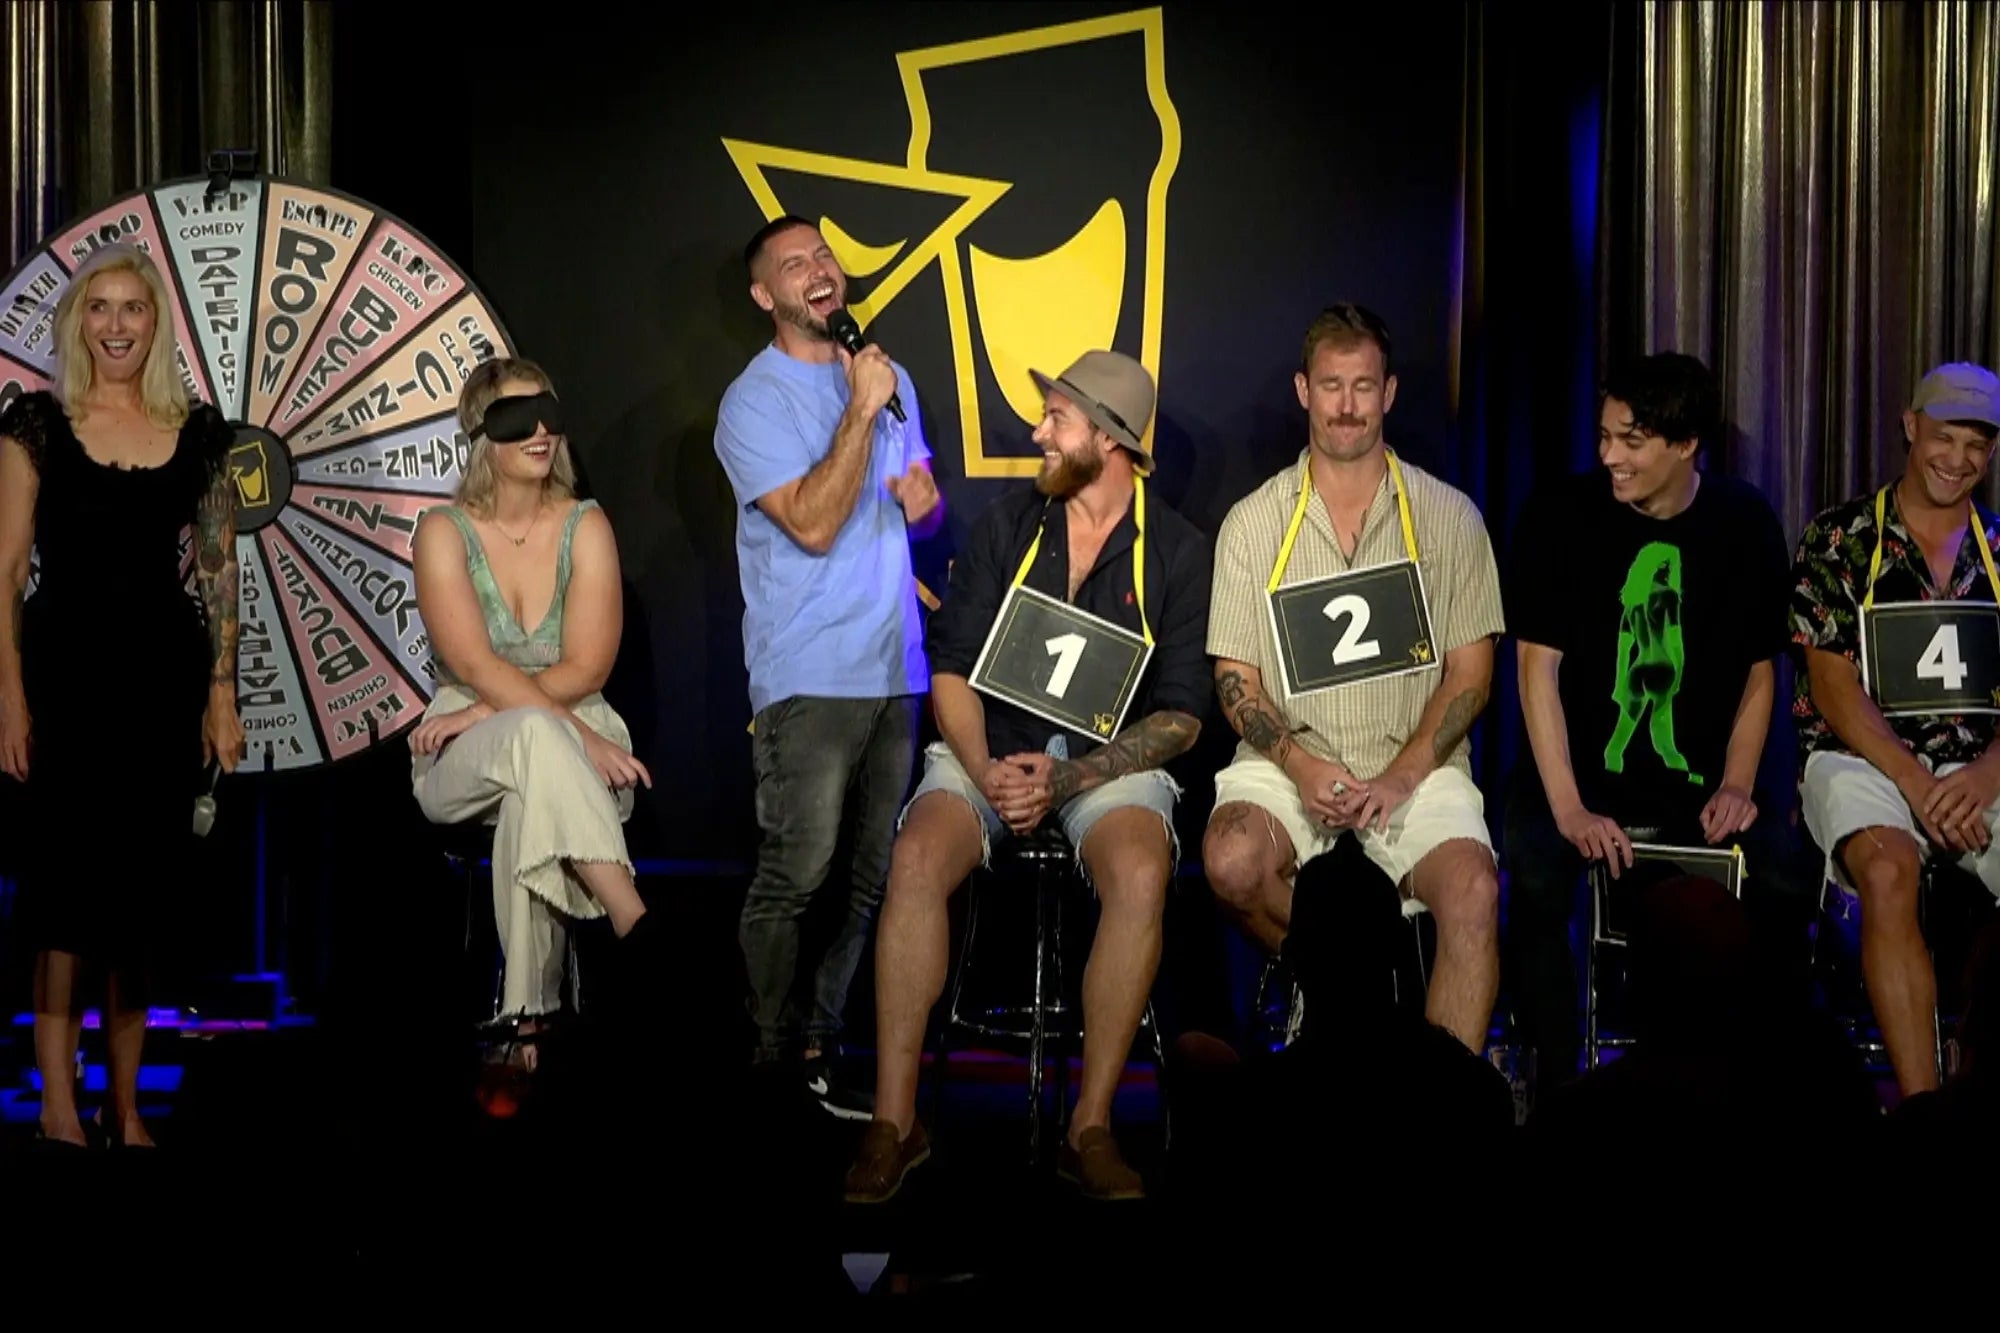 blind date comedy game show for singles to meet up. Contestants on stage laughing having a good time.